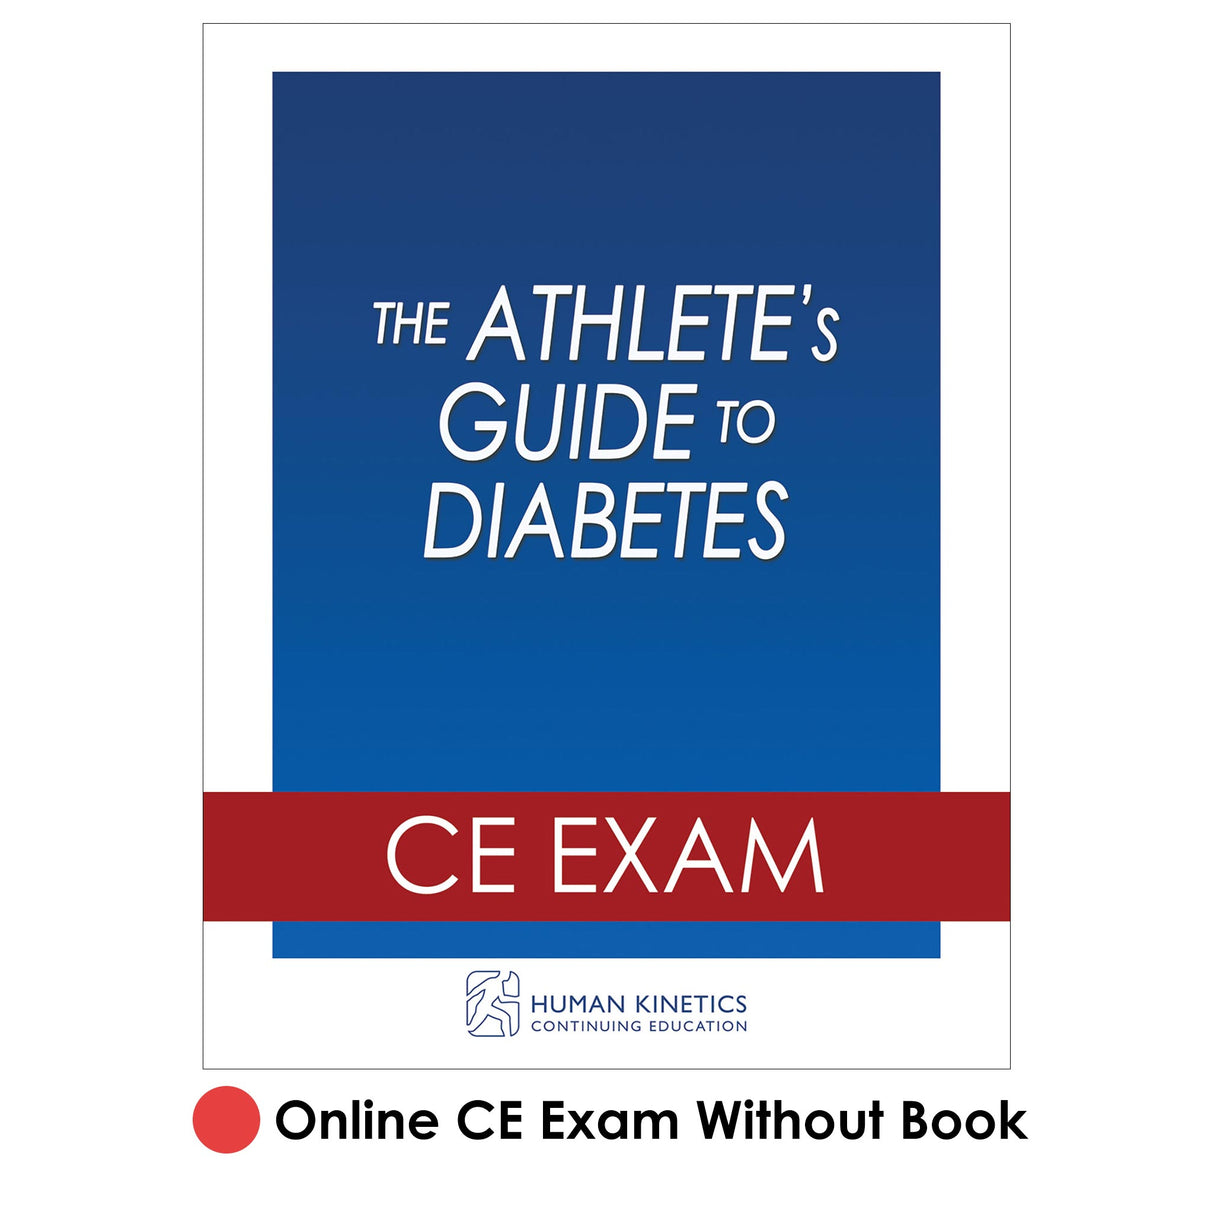 Athlete's Guide to Diabetes Online CE Exam Without Book, The